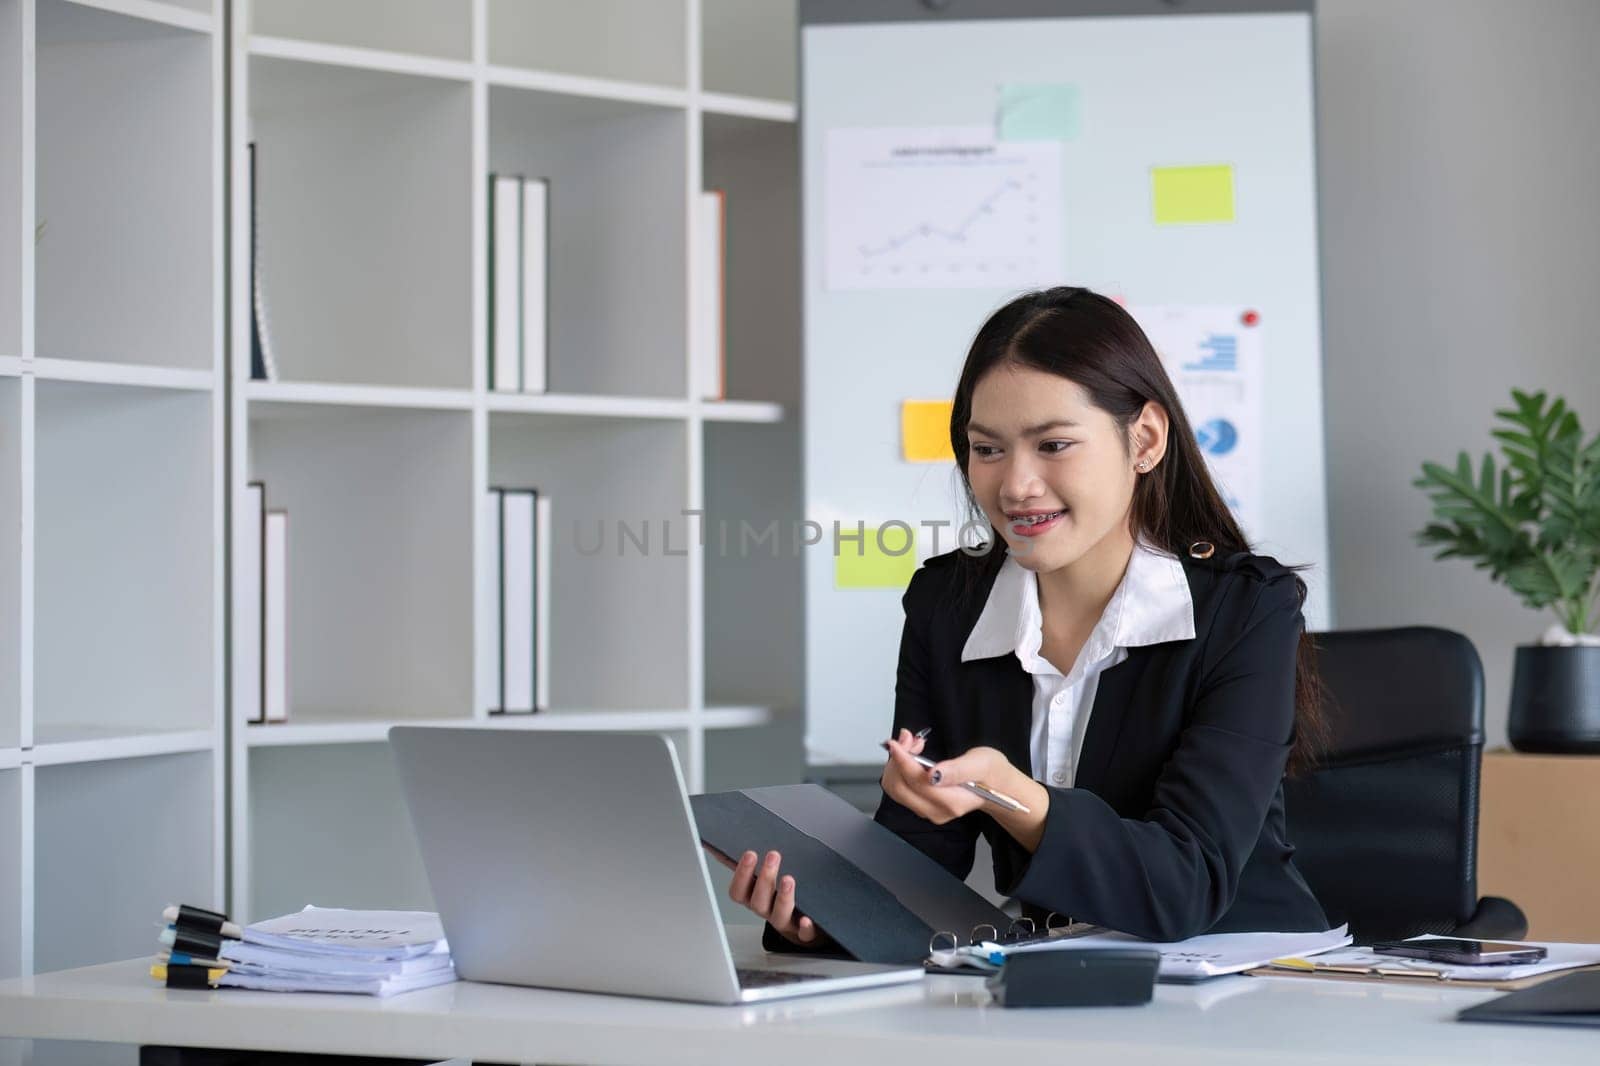 Business documents, business auditor Asian woman is reviewing legal documents, preparing documents or reports for analysis tax accountant documents agreement contract information in office at work.